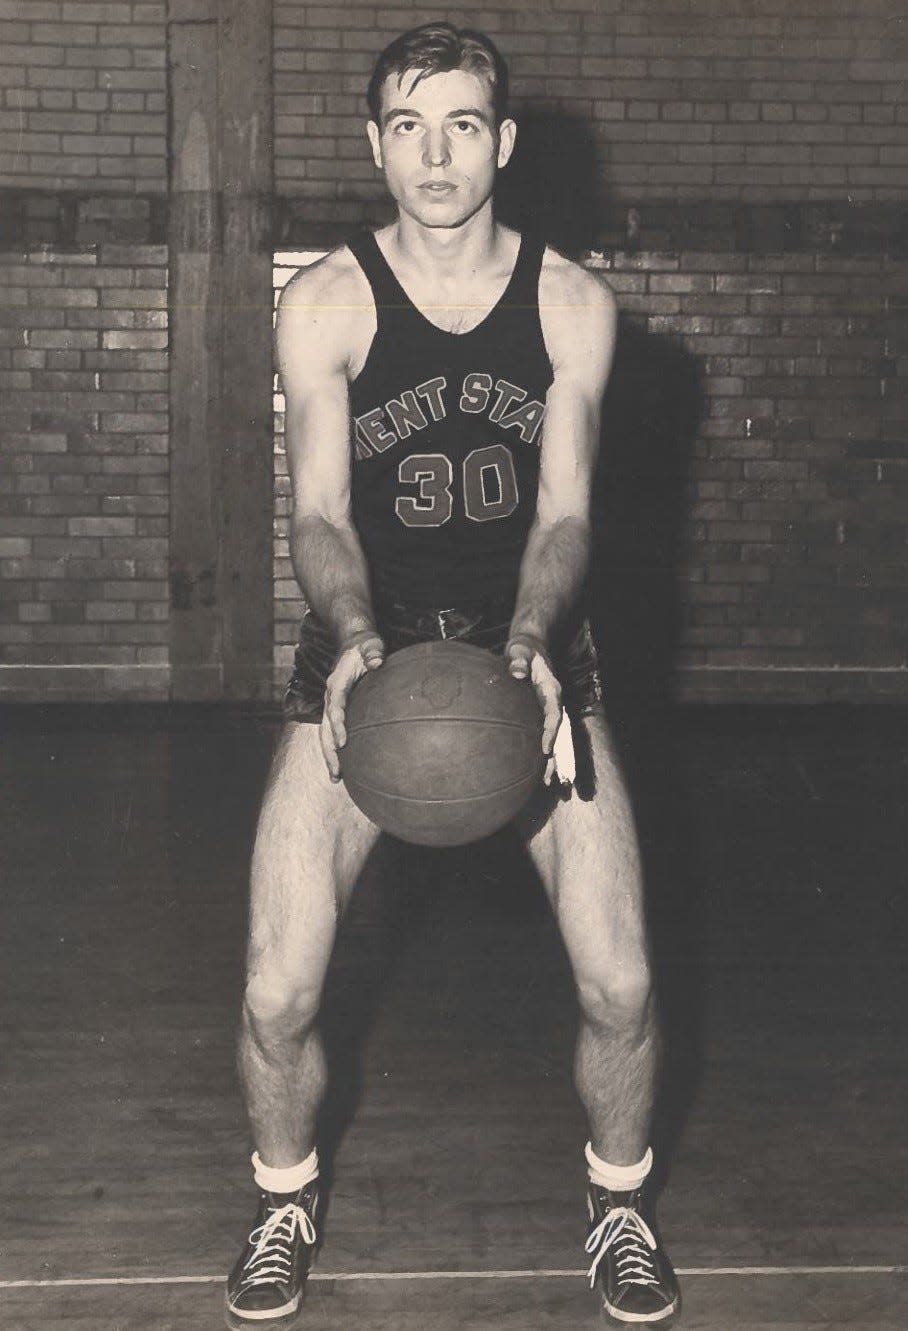 John Collver earned the nickname “Iceman” and set a single-season record for free-throw percentage at Kent State University.